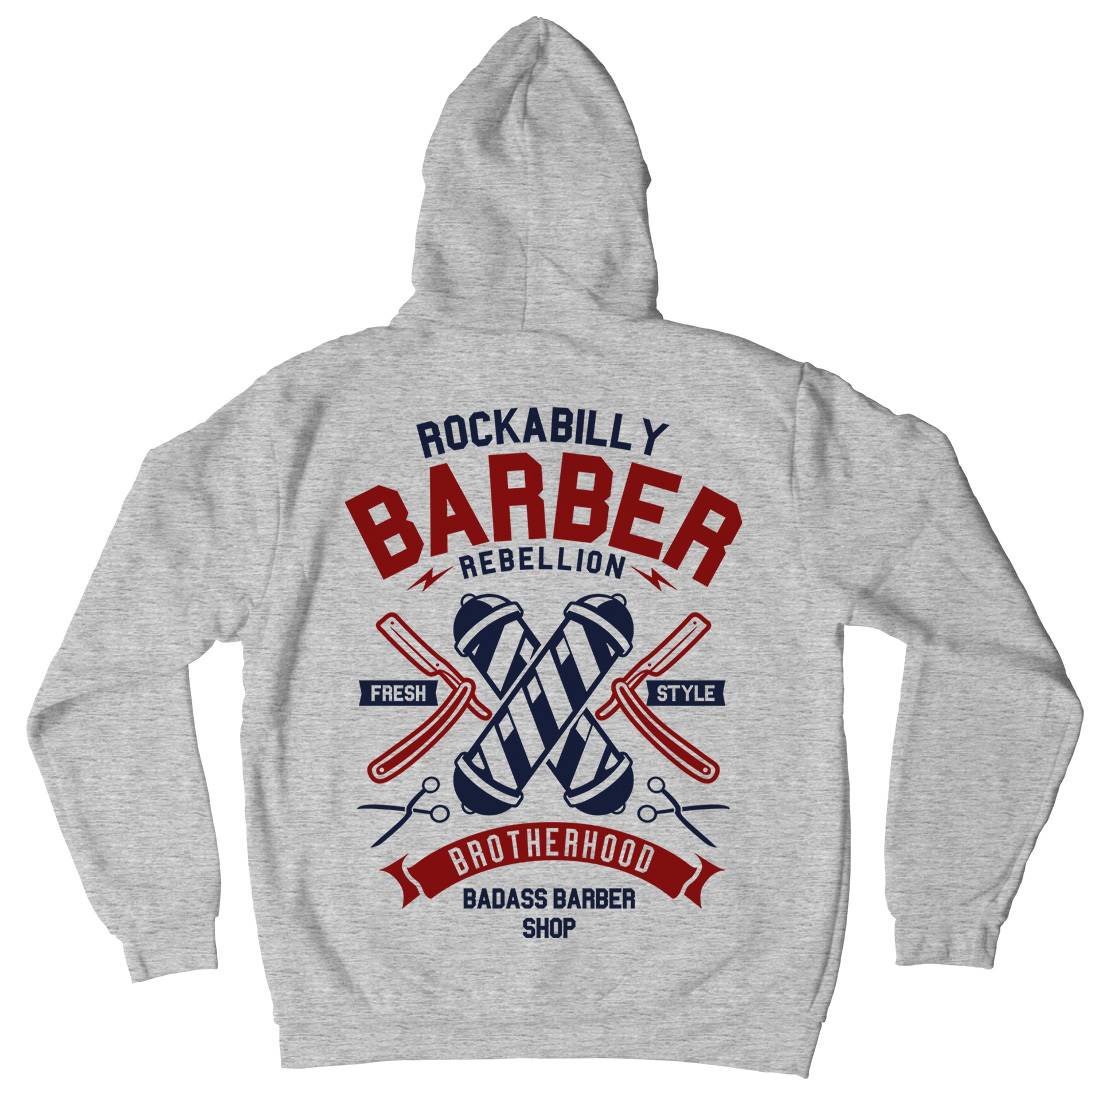 Rockabilly Mens Hoodie With Pocket Barber A273